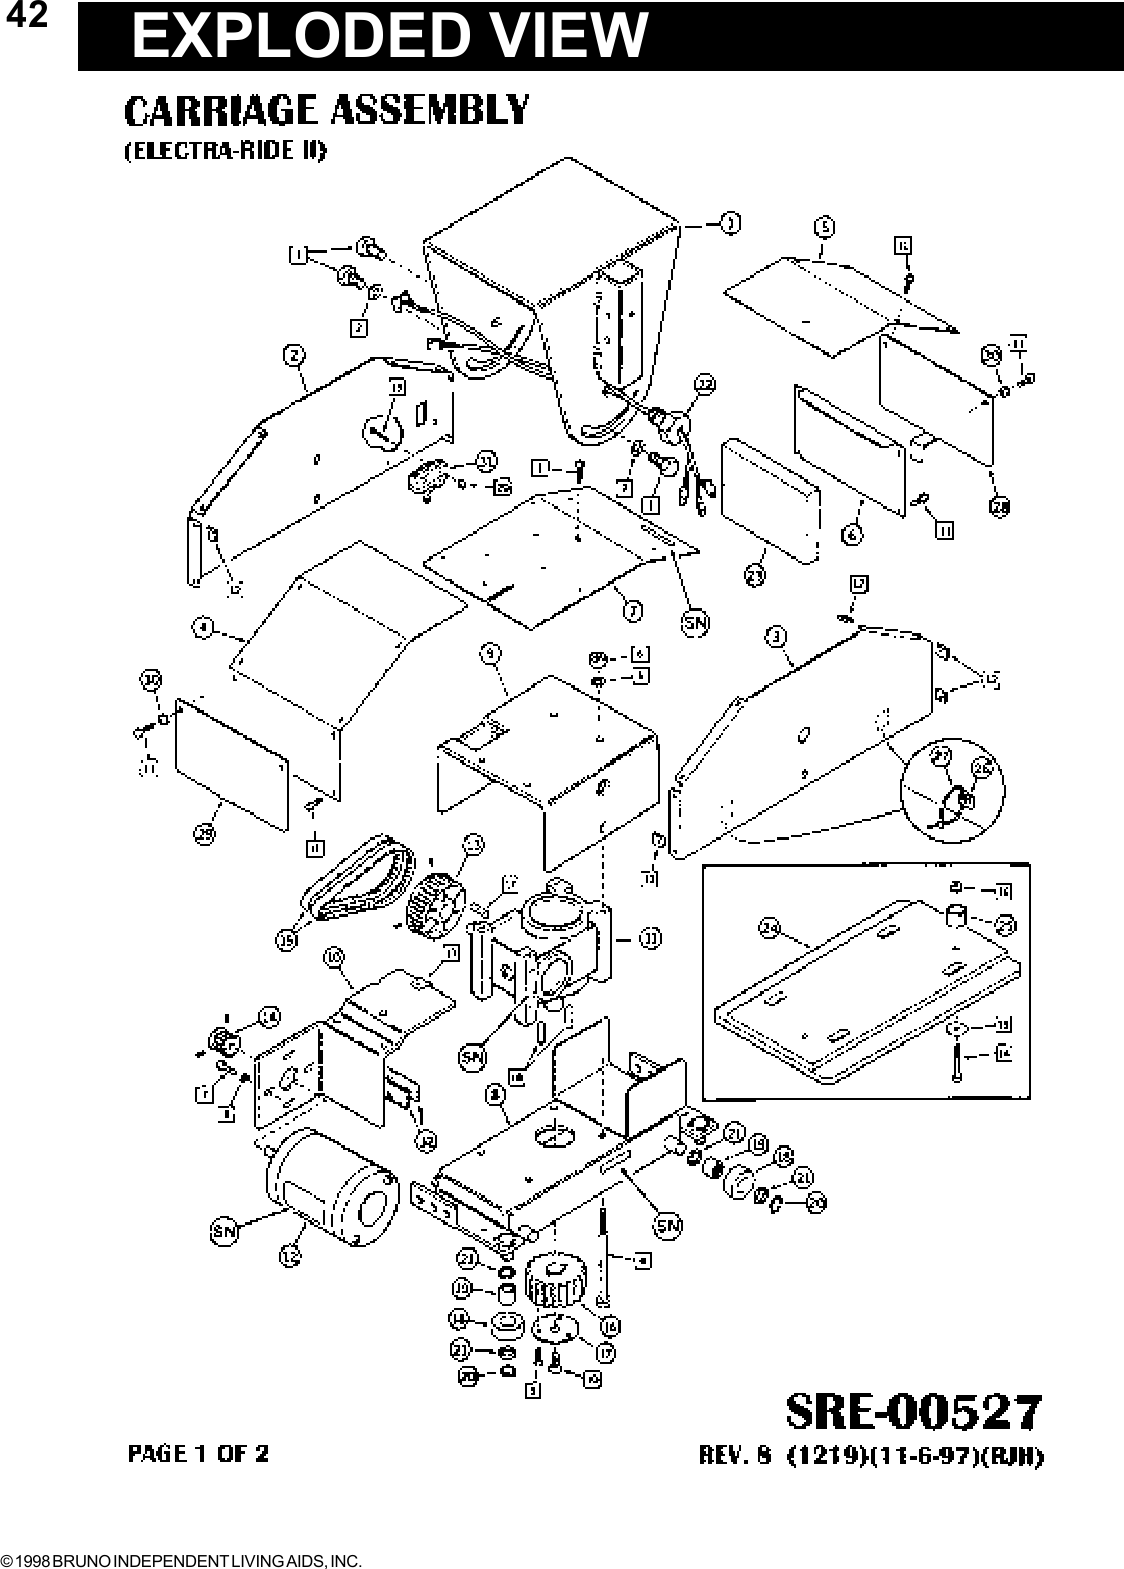 © 1998 BRUNO INDEPENDENT LIVING AIDS, INC.42 EXPLODED VIEW